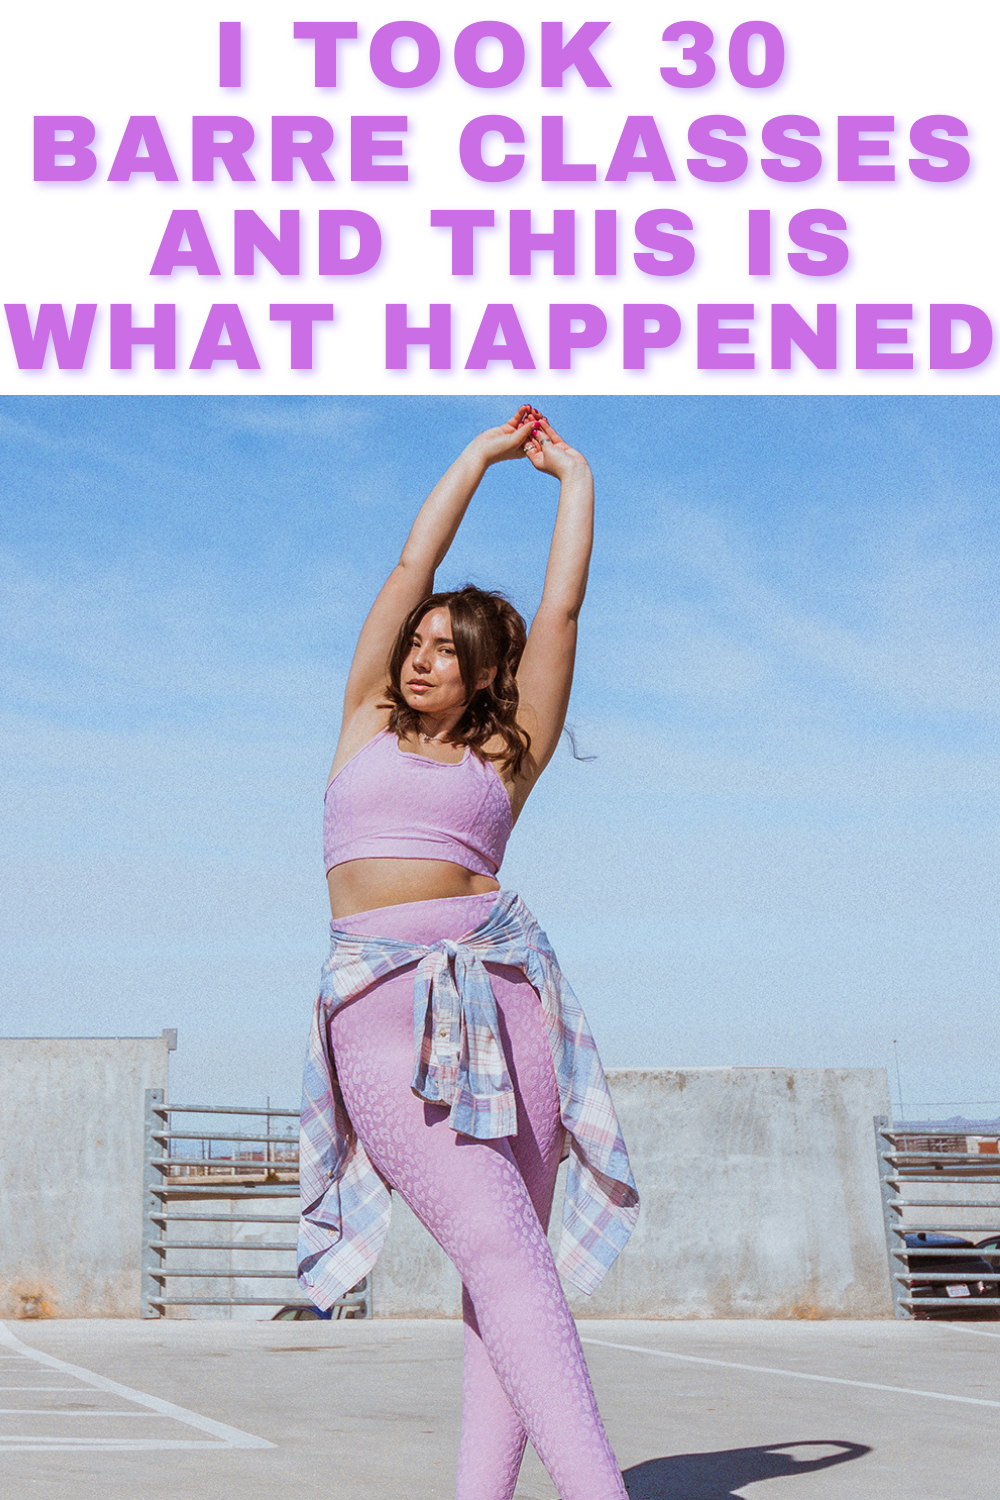 I took 30 barre classes and this is what happened